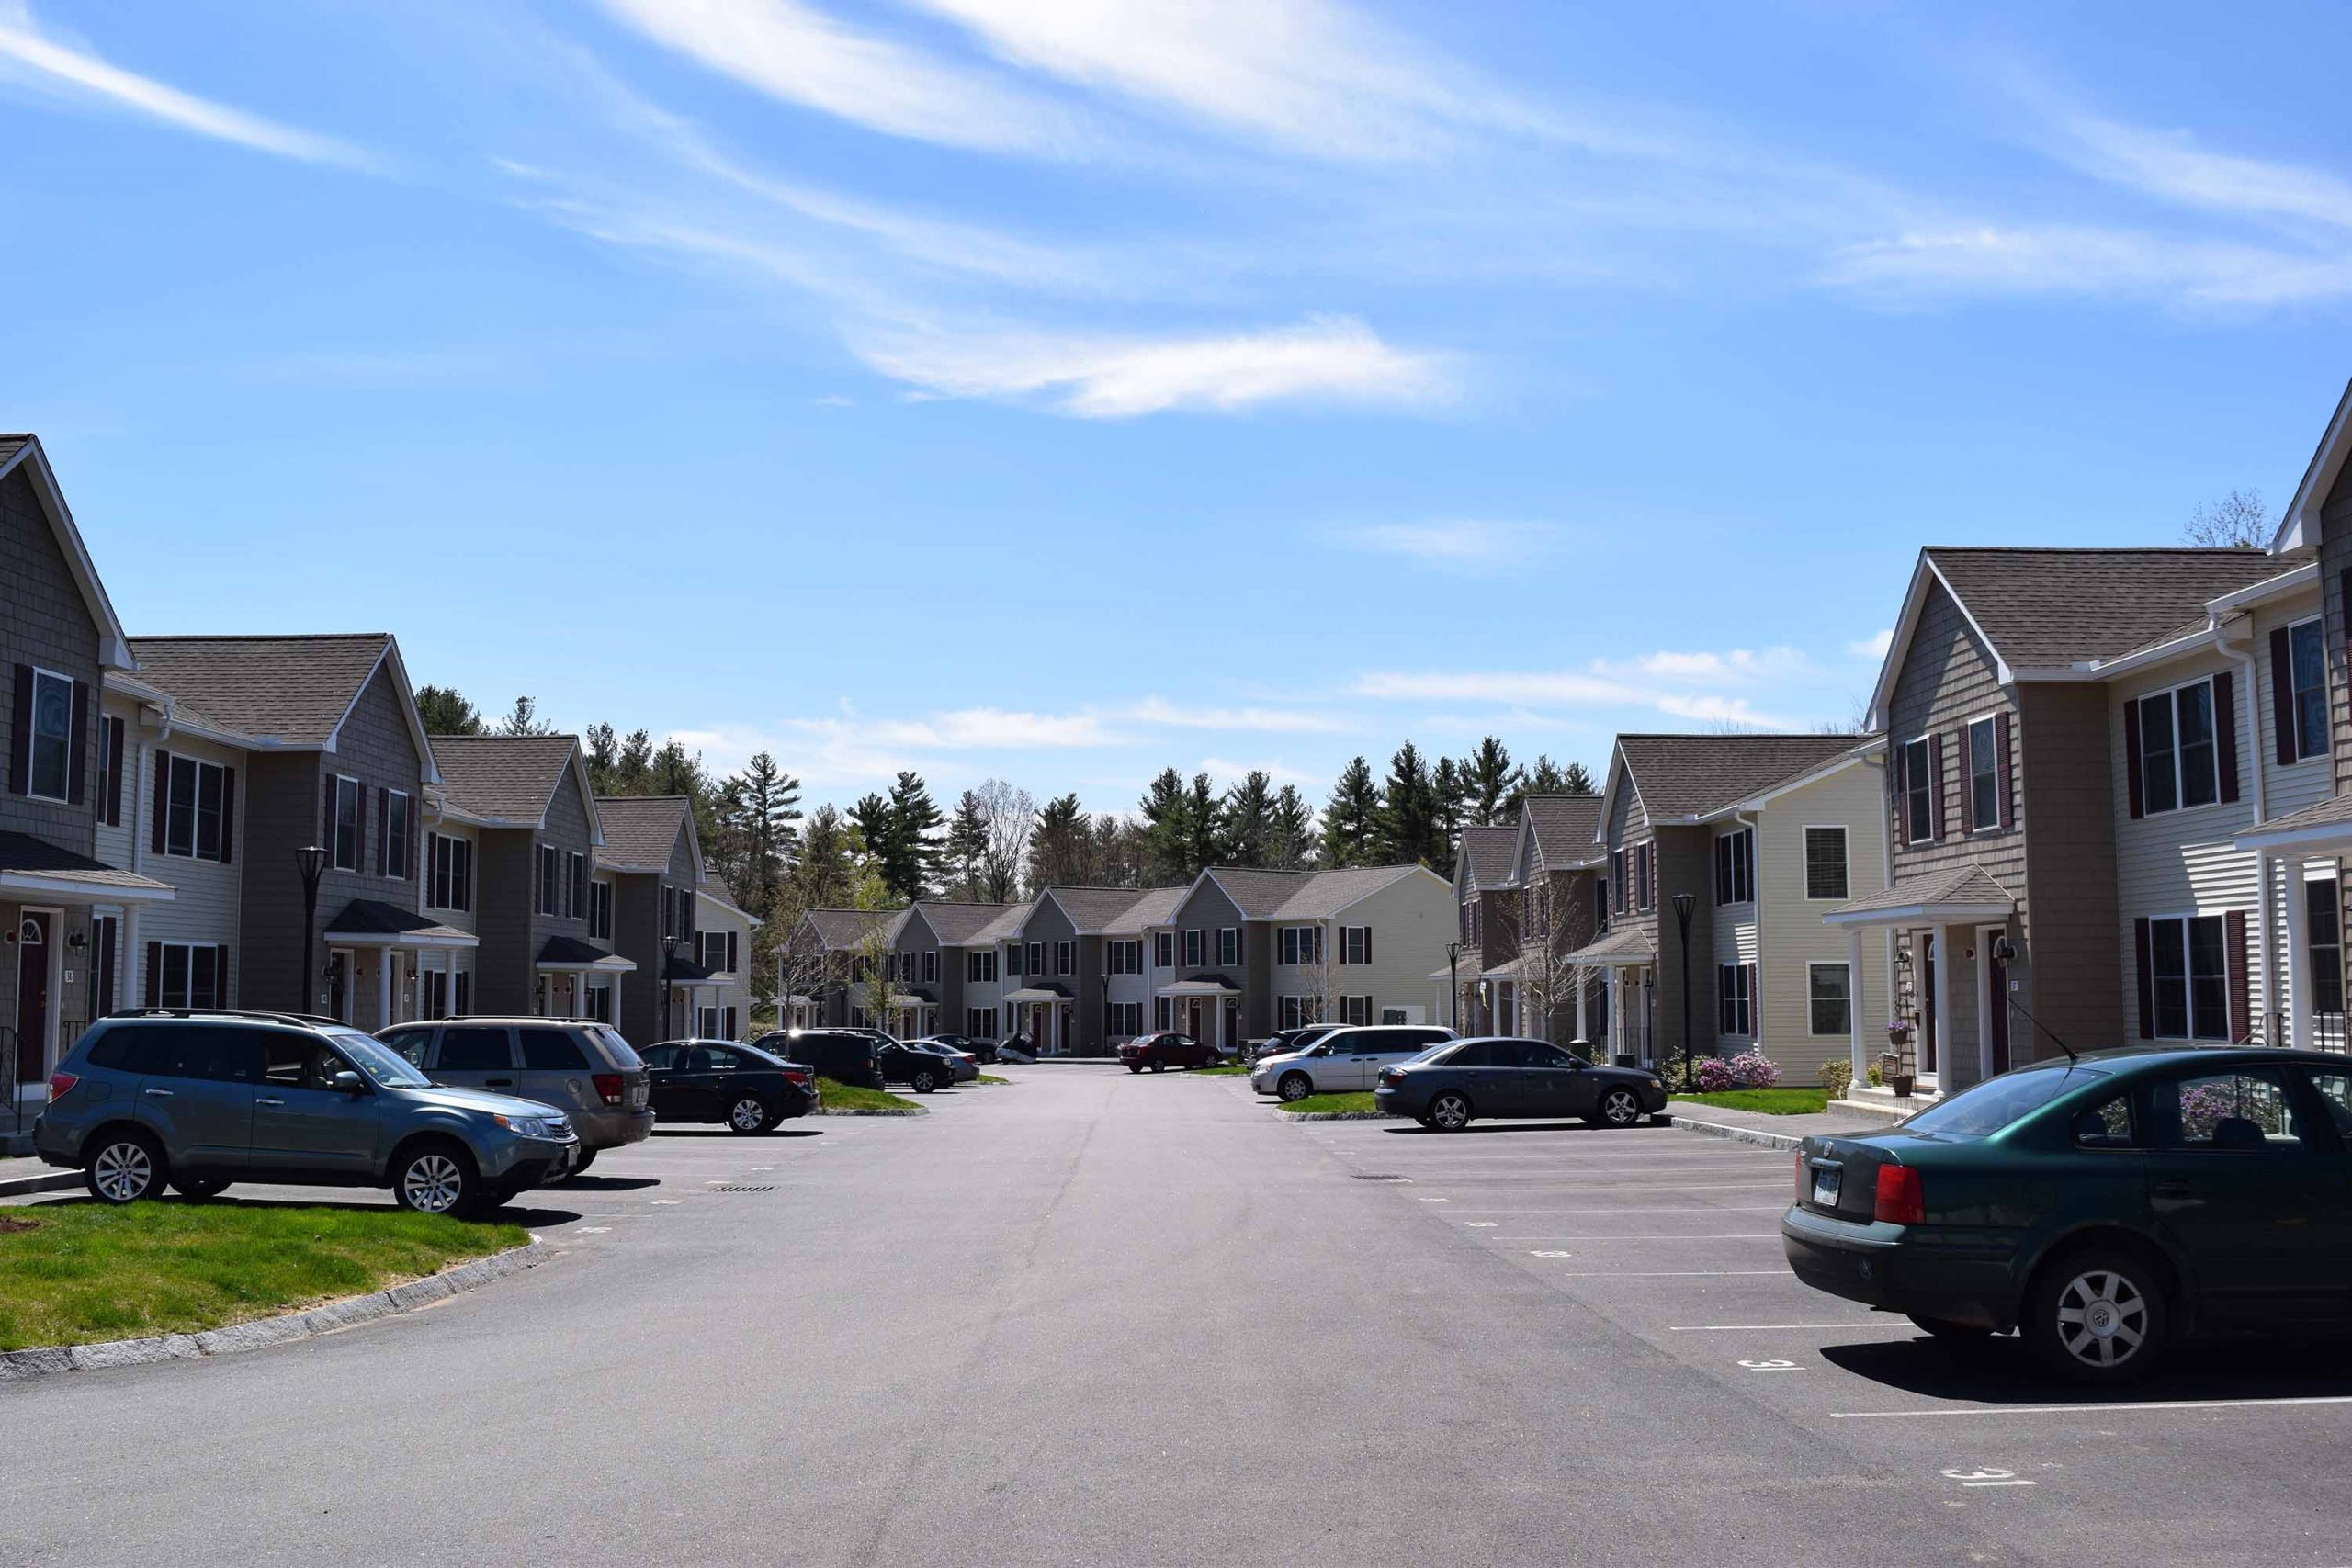 Evergreen Way community street by Socha Companies is a quality townhouse community in Manchester, NH